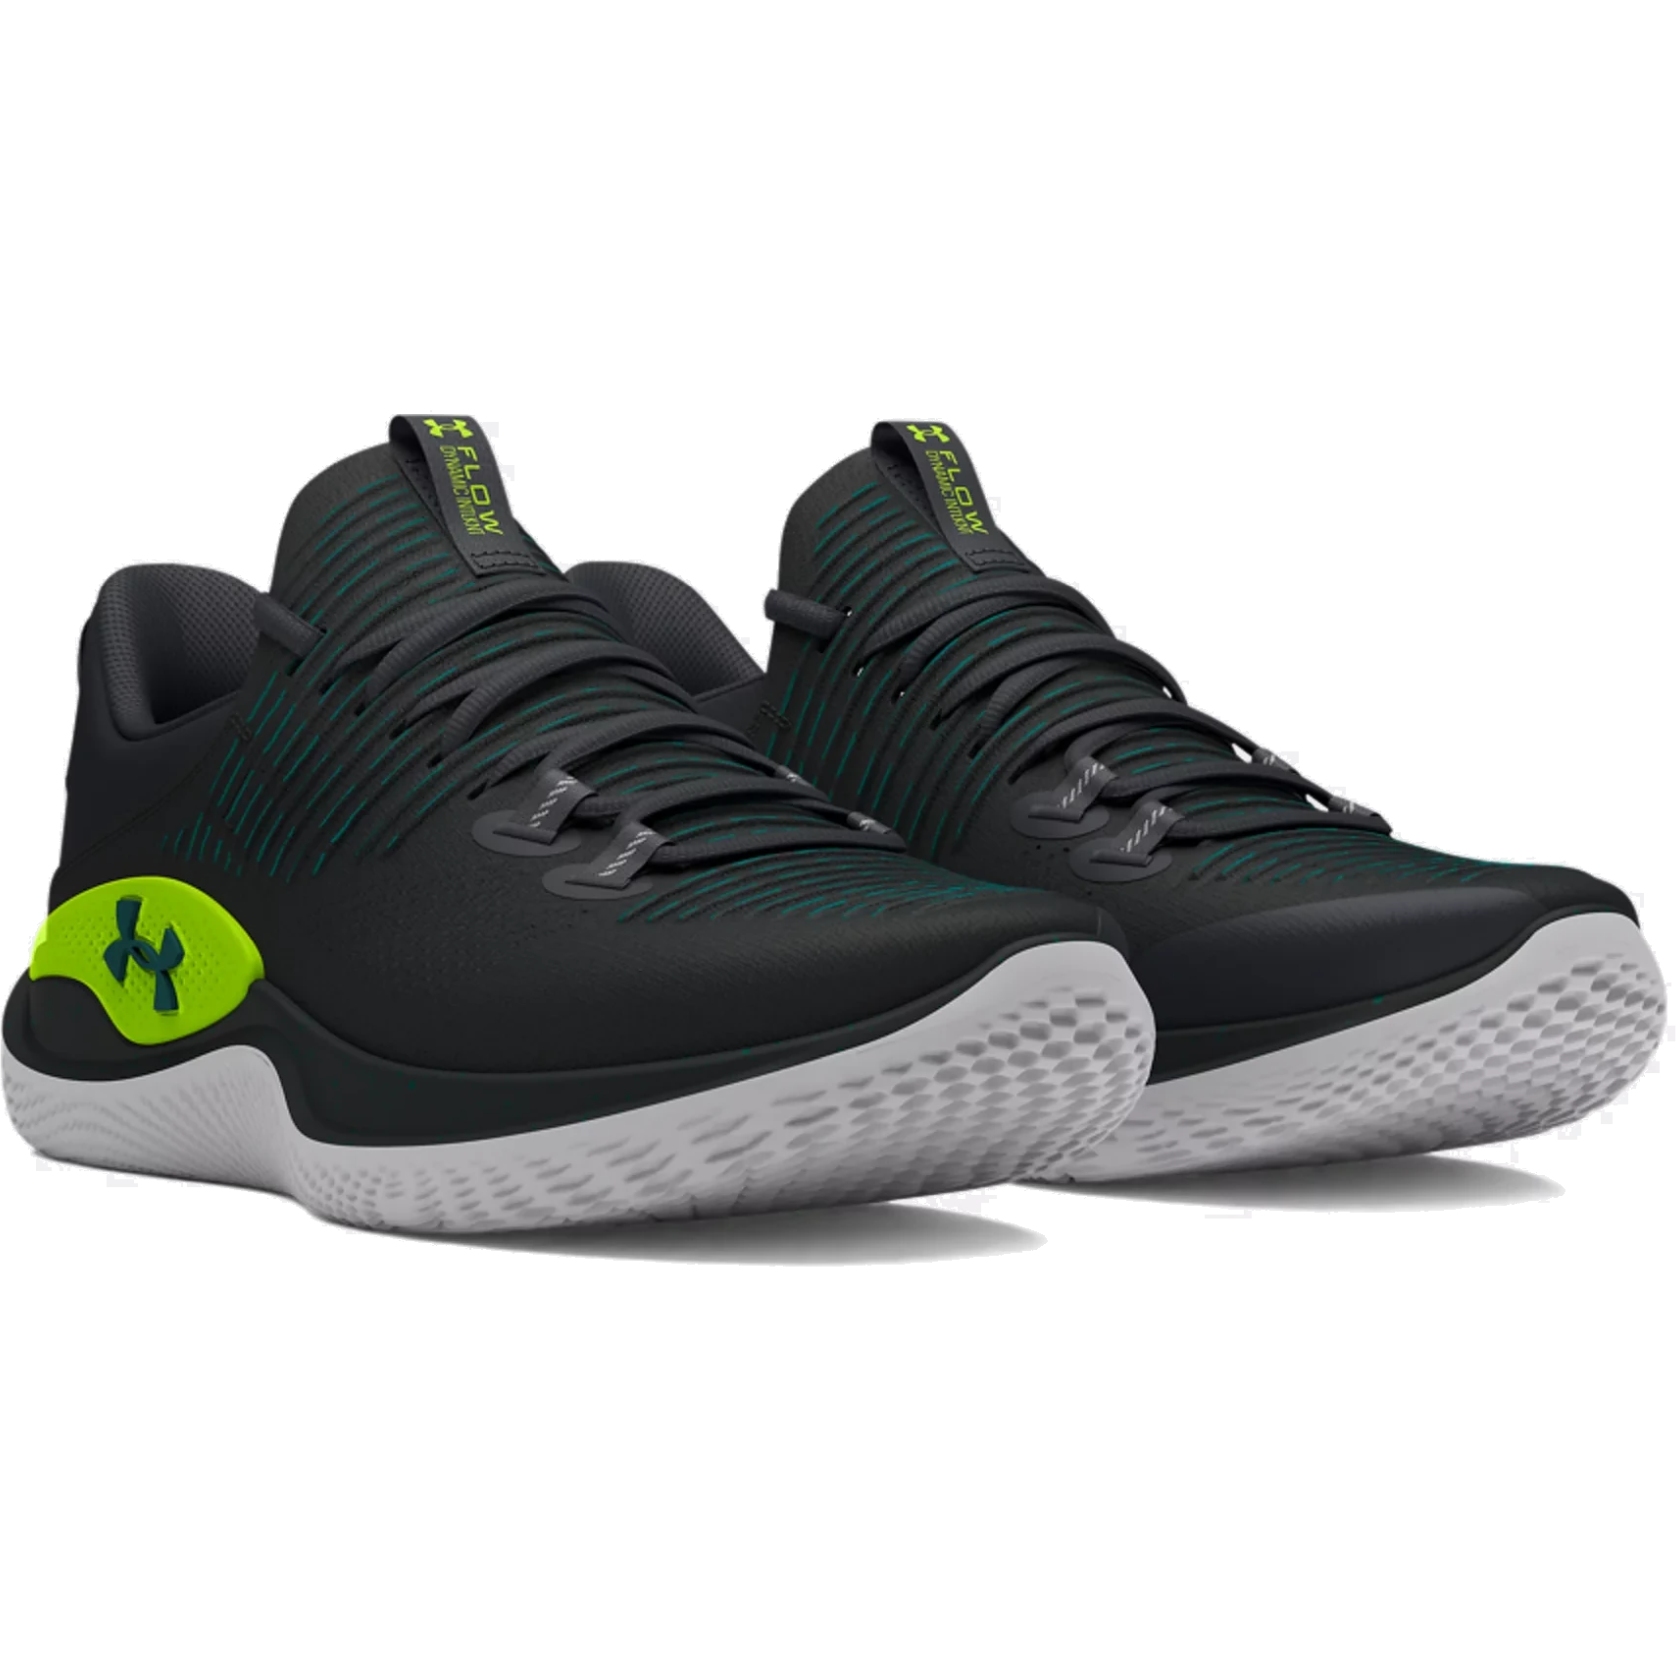 Picture of Under Armour UA Dynamic Training Shoes Men - Black/Anthracite/Hydro Teal